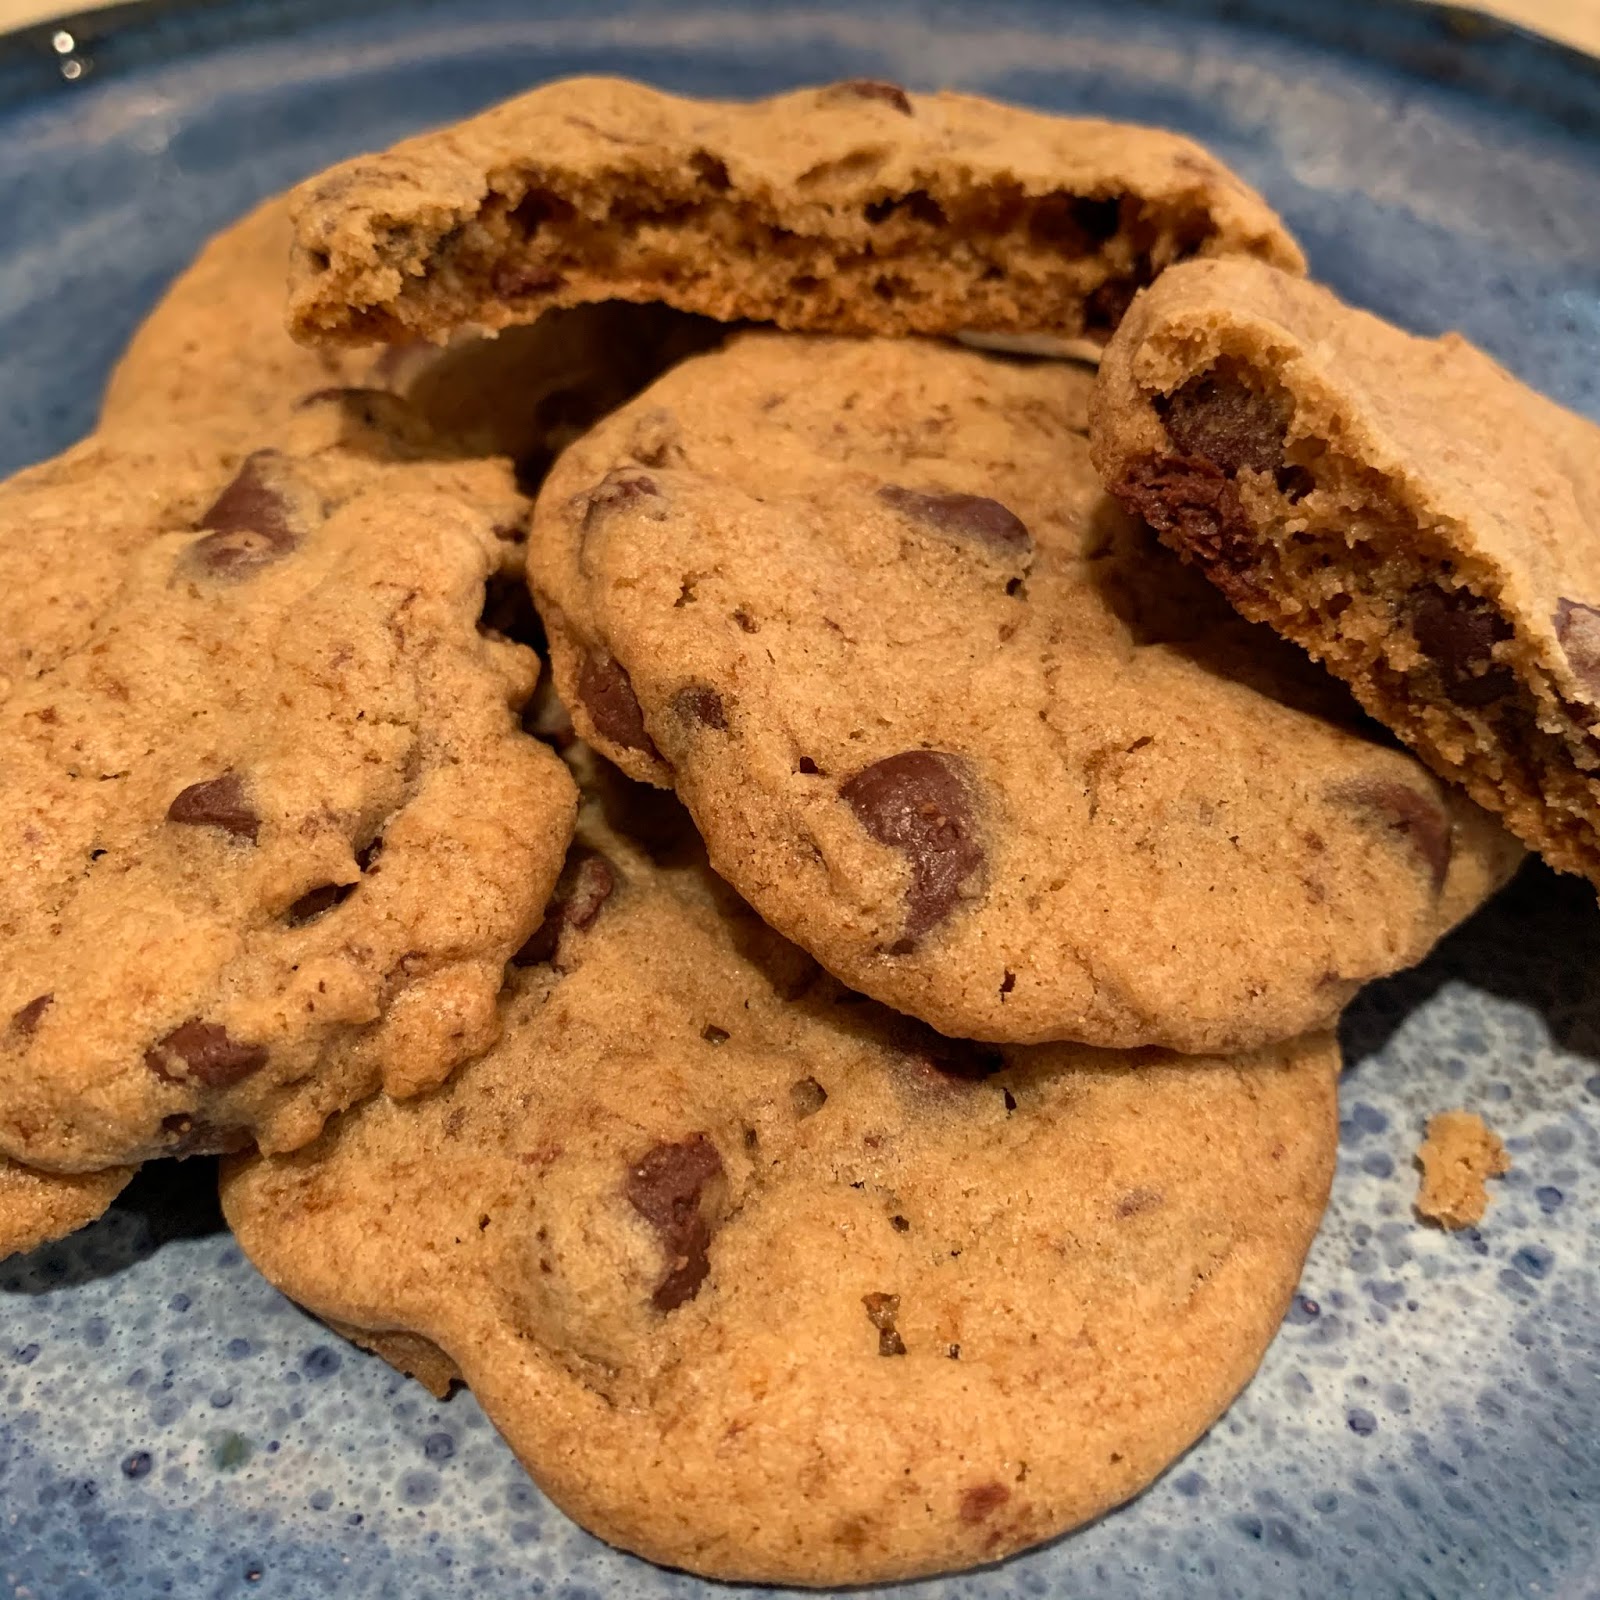 The Neiman Marcus Chocolate Chip Cookie